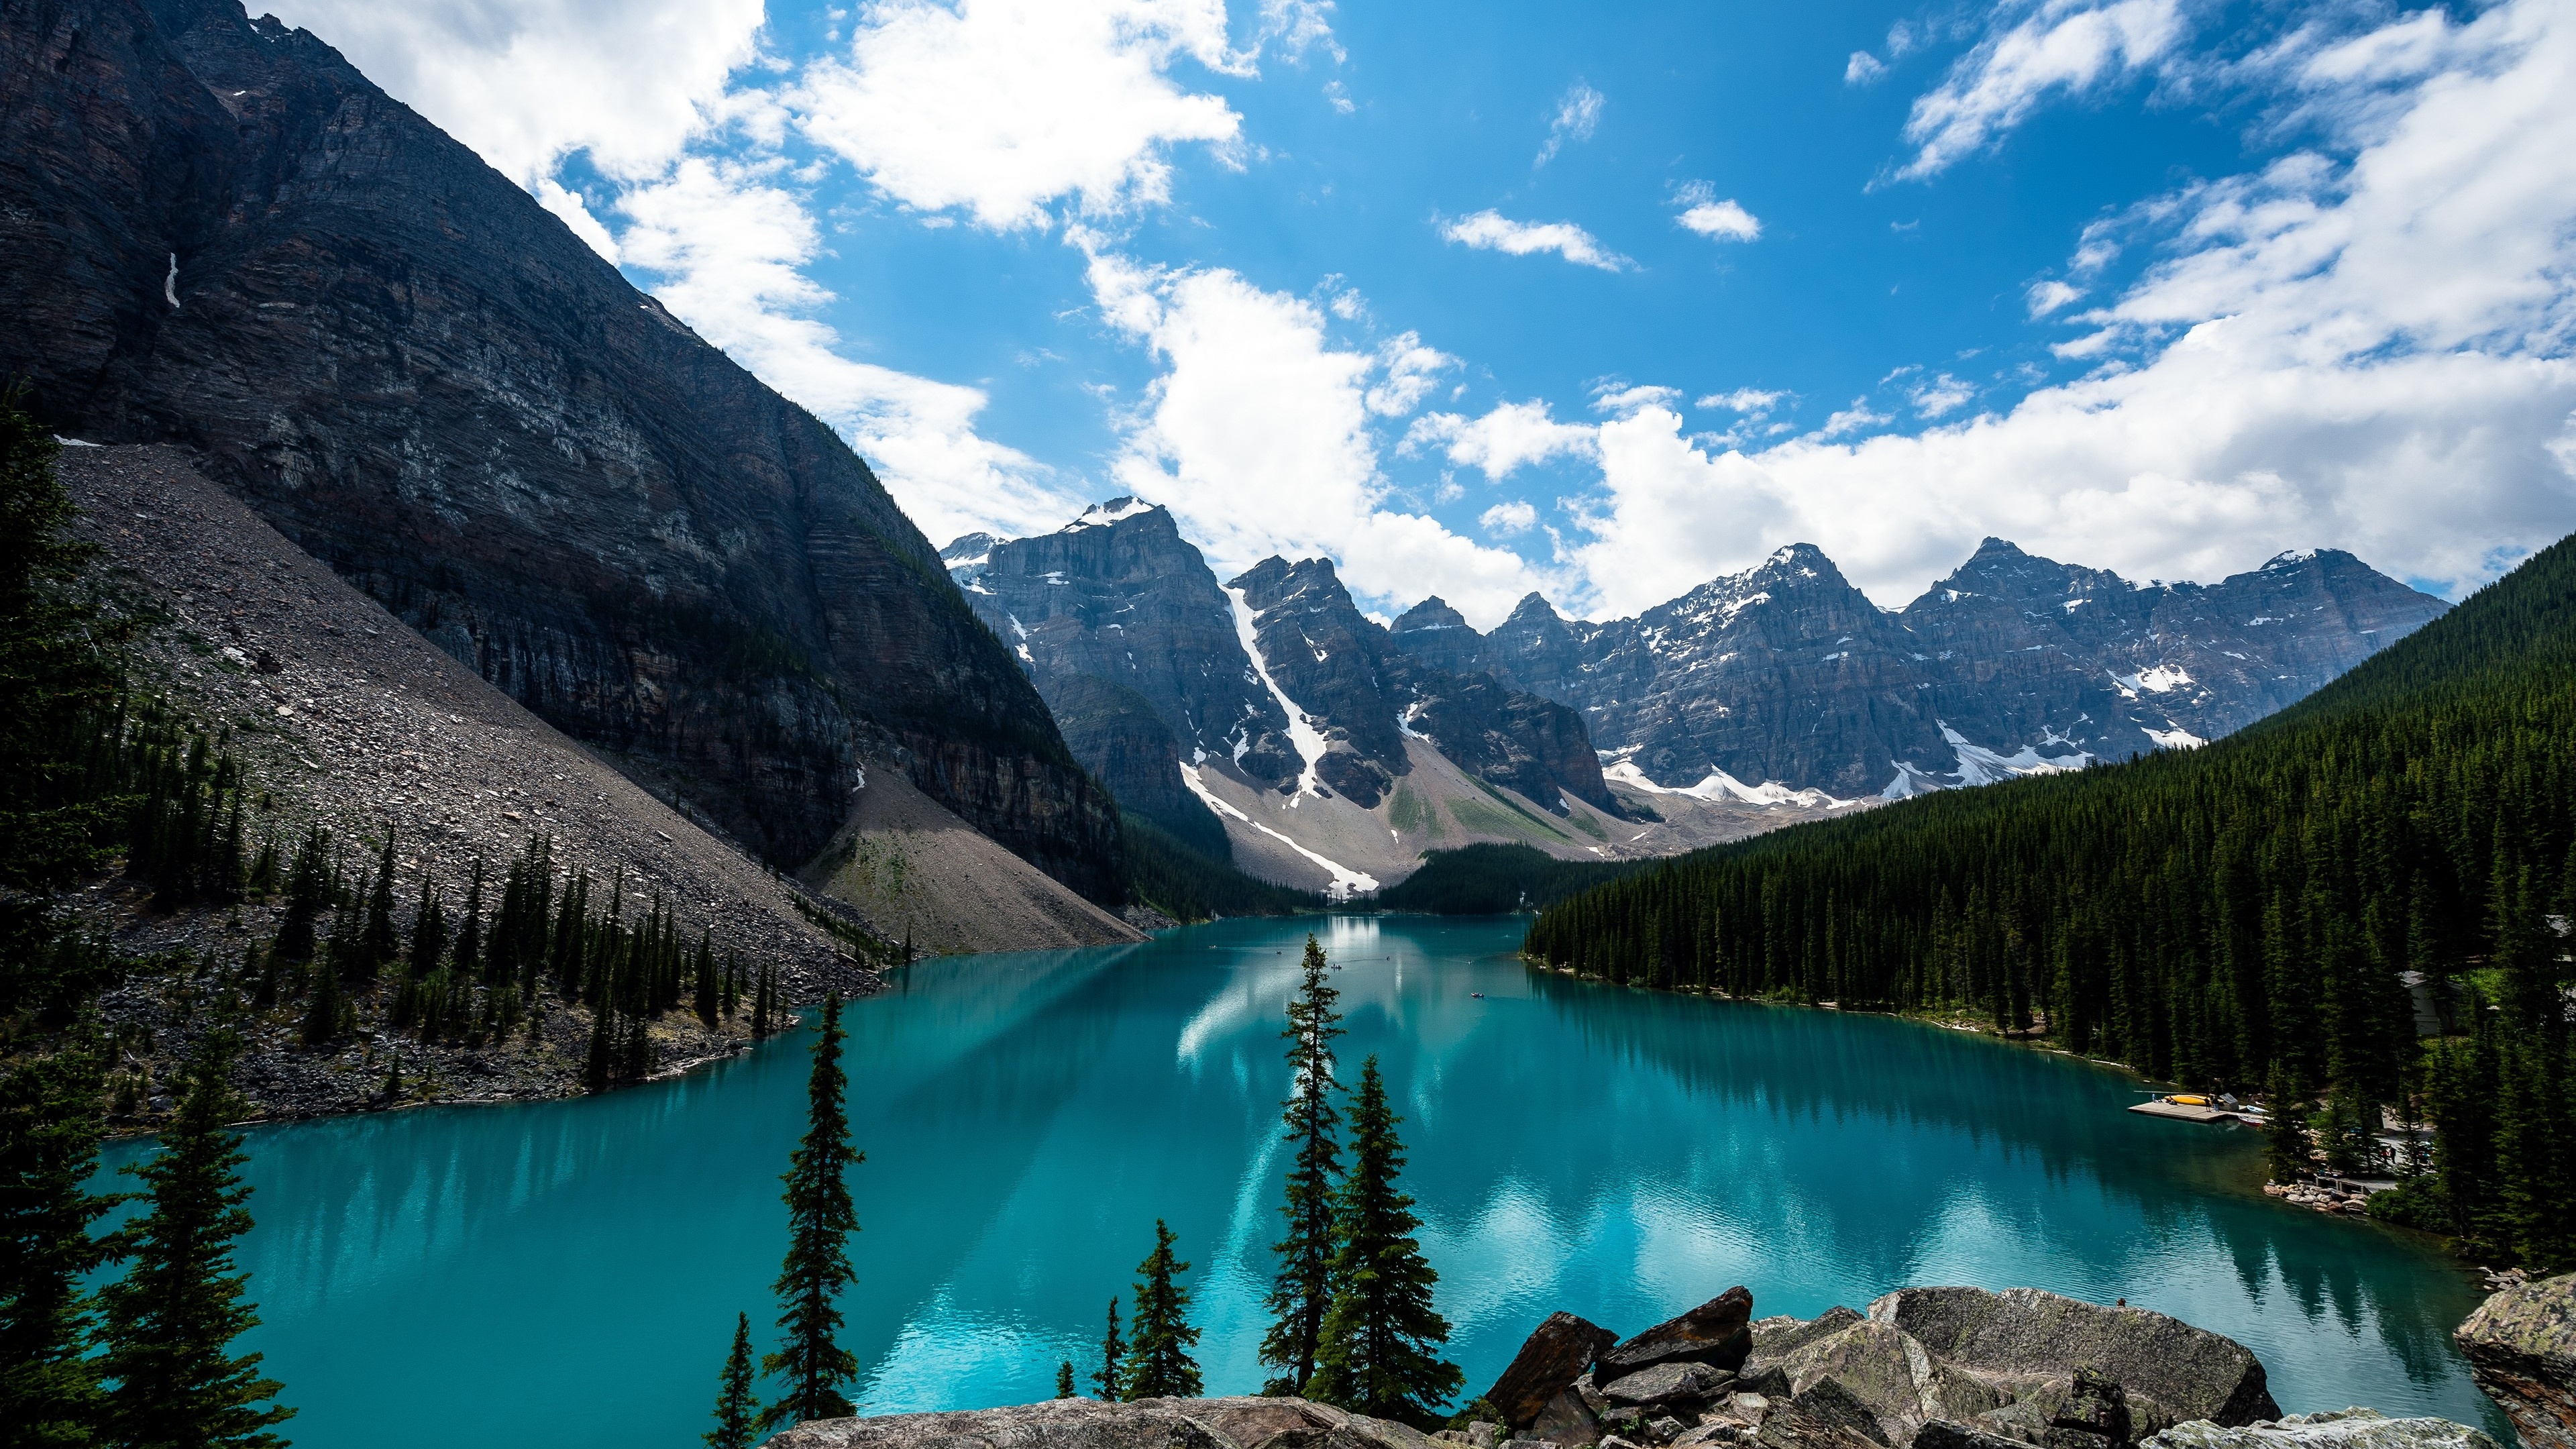 Cool Macbook Backgrounds Lake Louise Canada 113 | HD Wallpapers